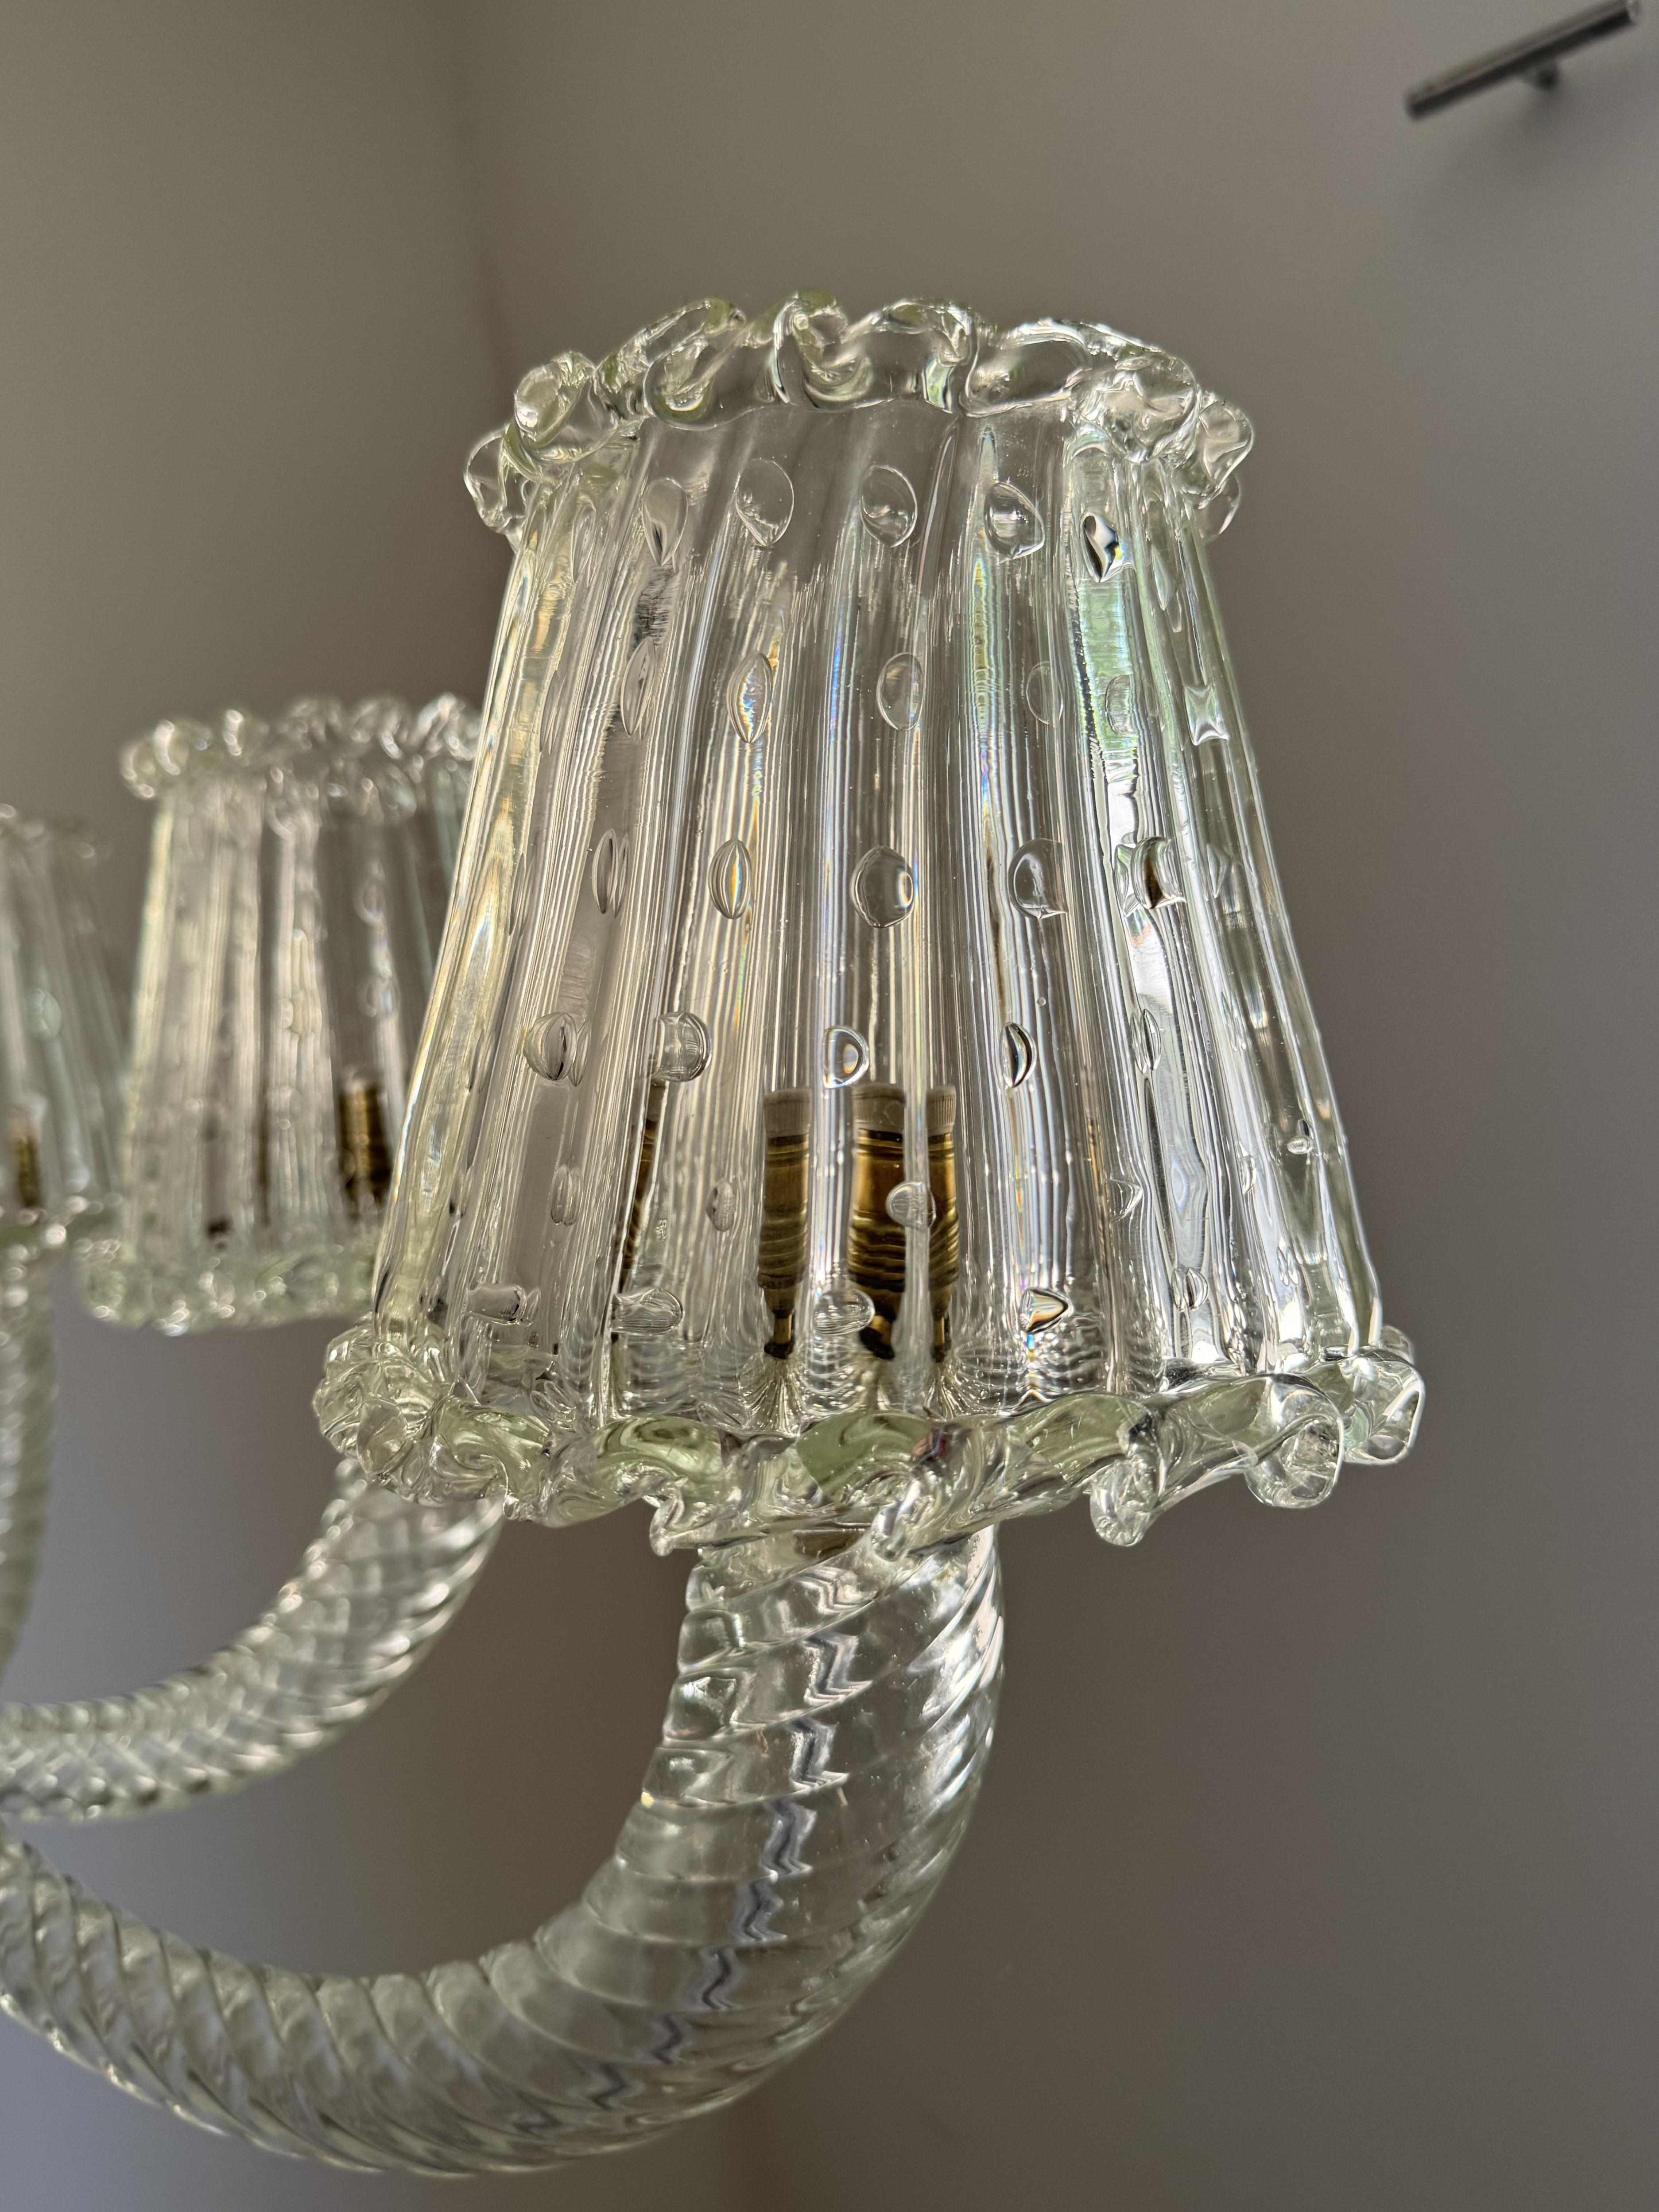 Art Deco Six Light Chandelier Attr. Barovier & Toso, Murano, Italy ca. 1930 For Sale 2